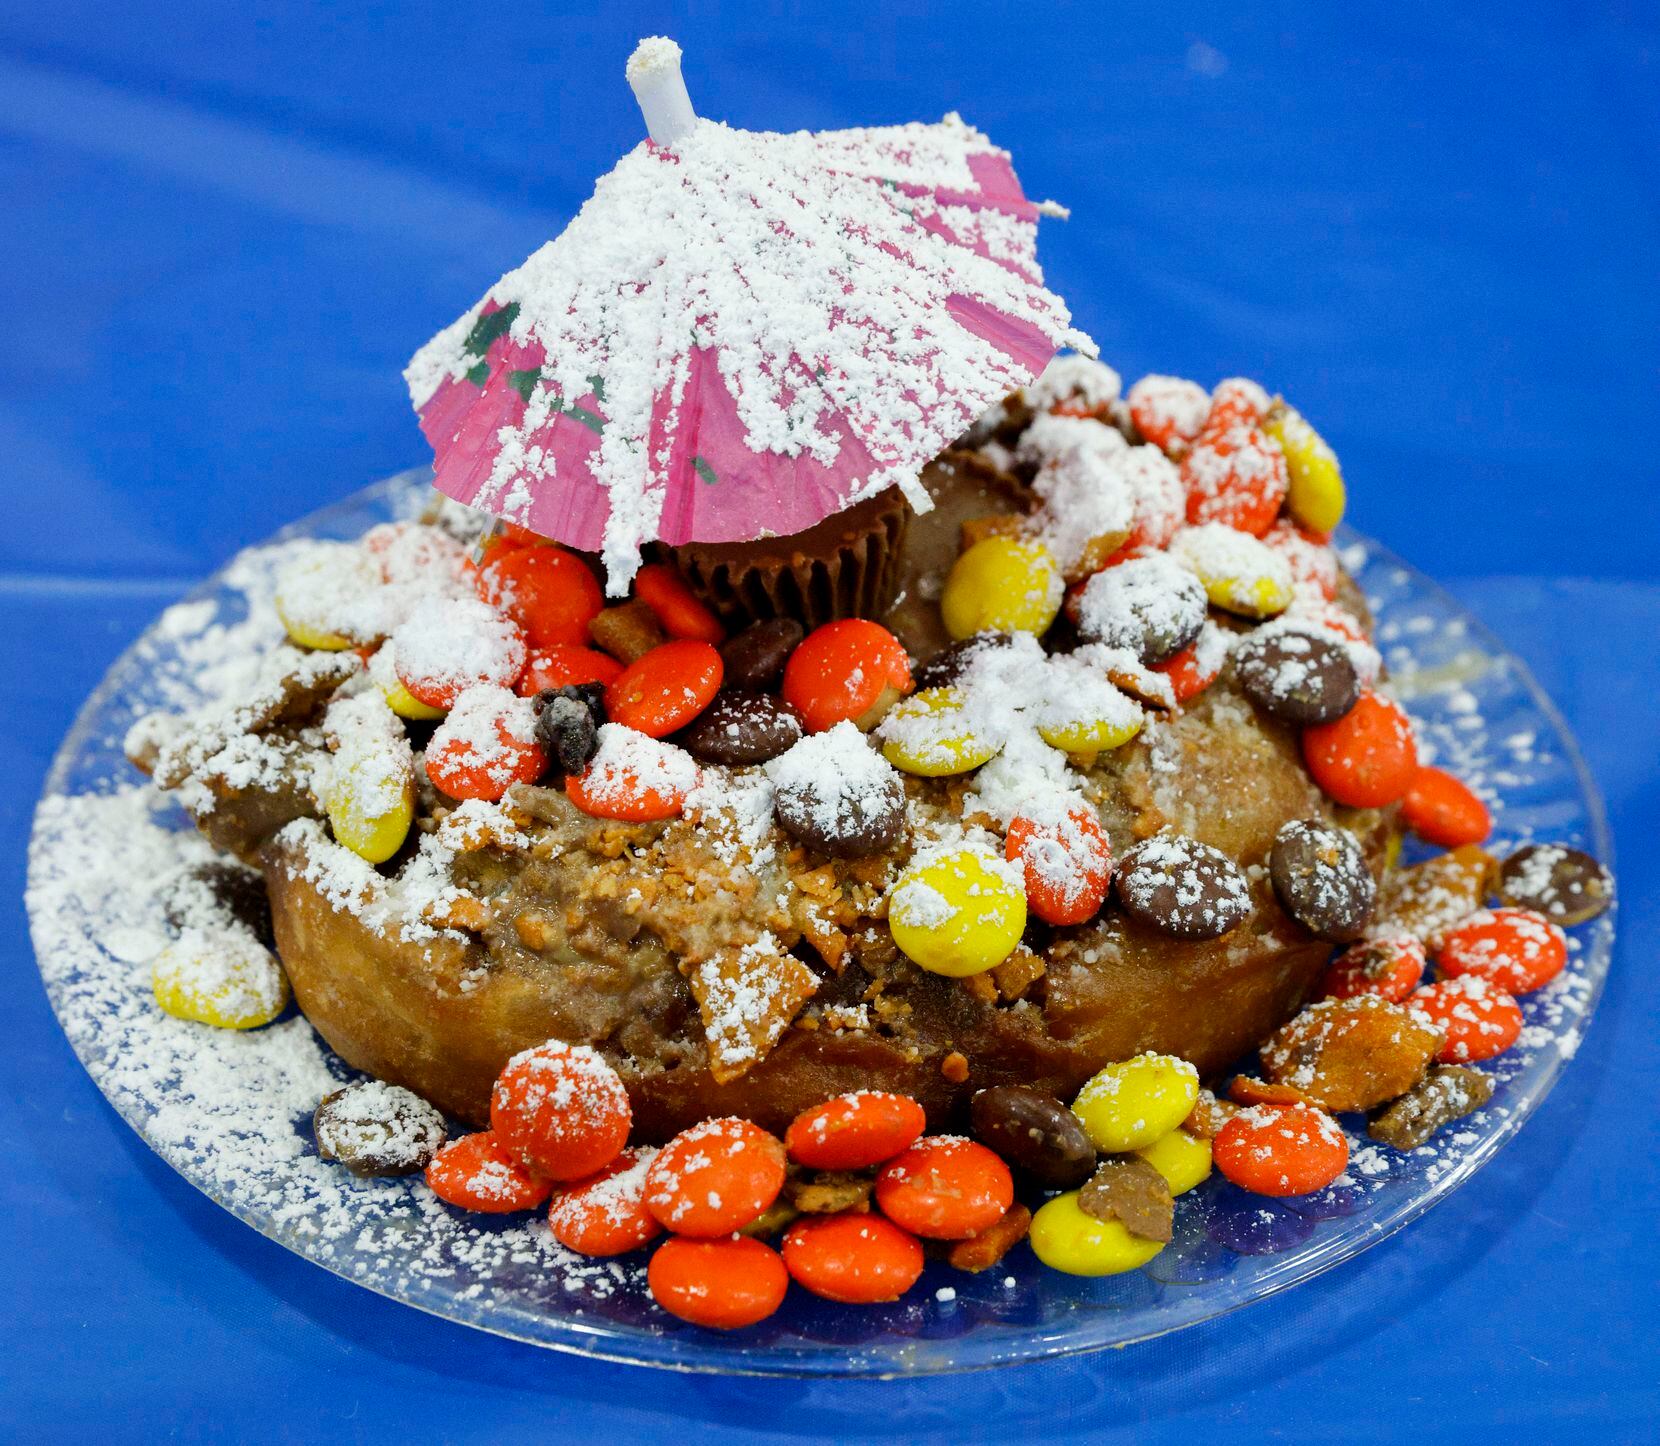 Peanut Butter Paradise, made by first-time Big Tex Choice Awards winners Chris Easter and...